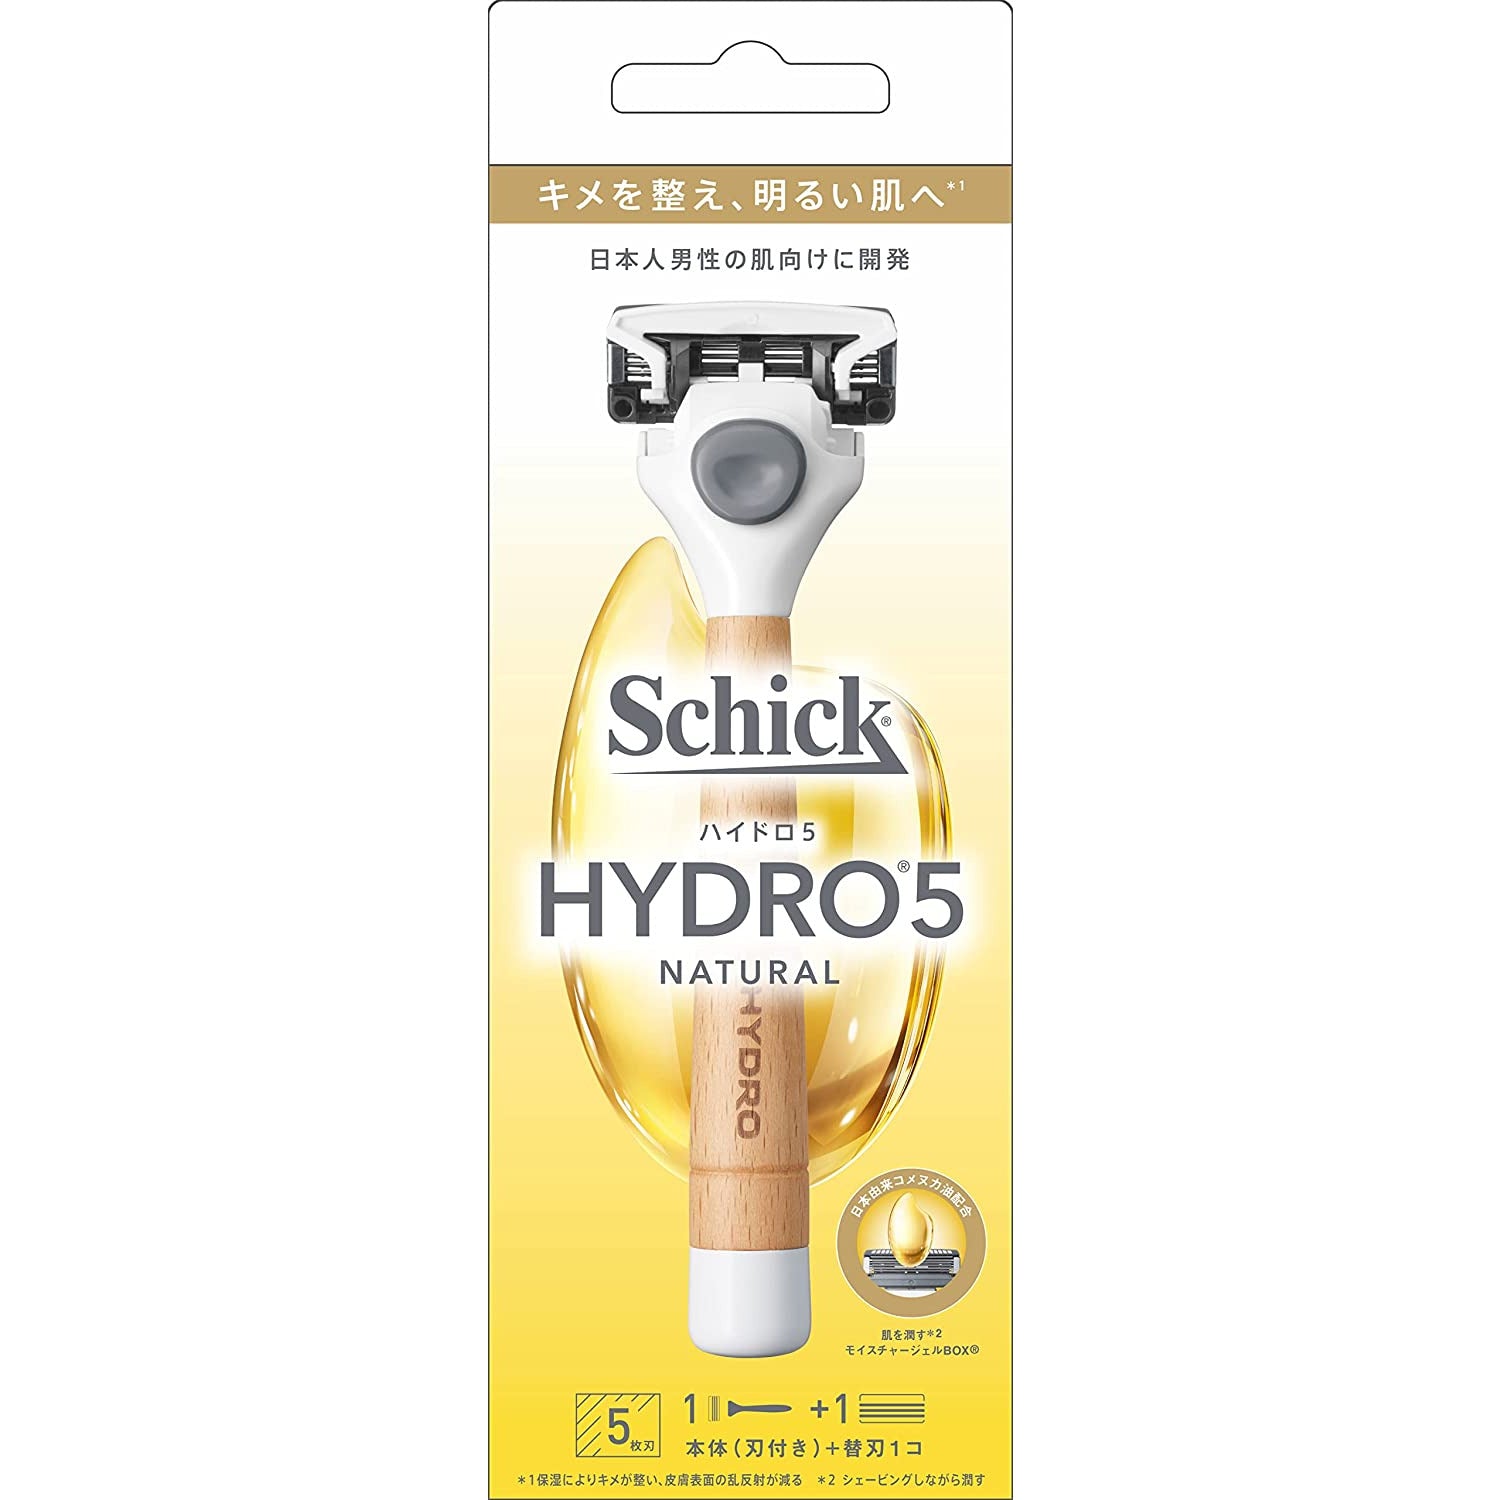 Schick Hydro 5 Natural Holder with Blade + 1 Spare Blade